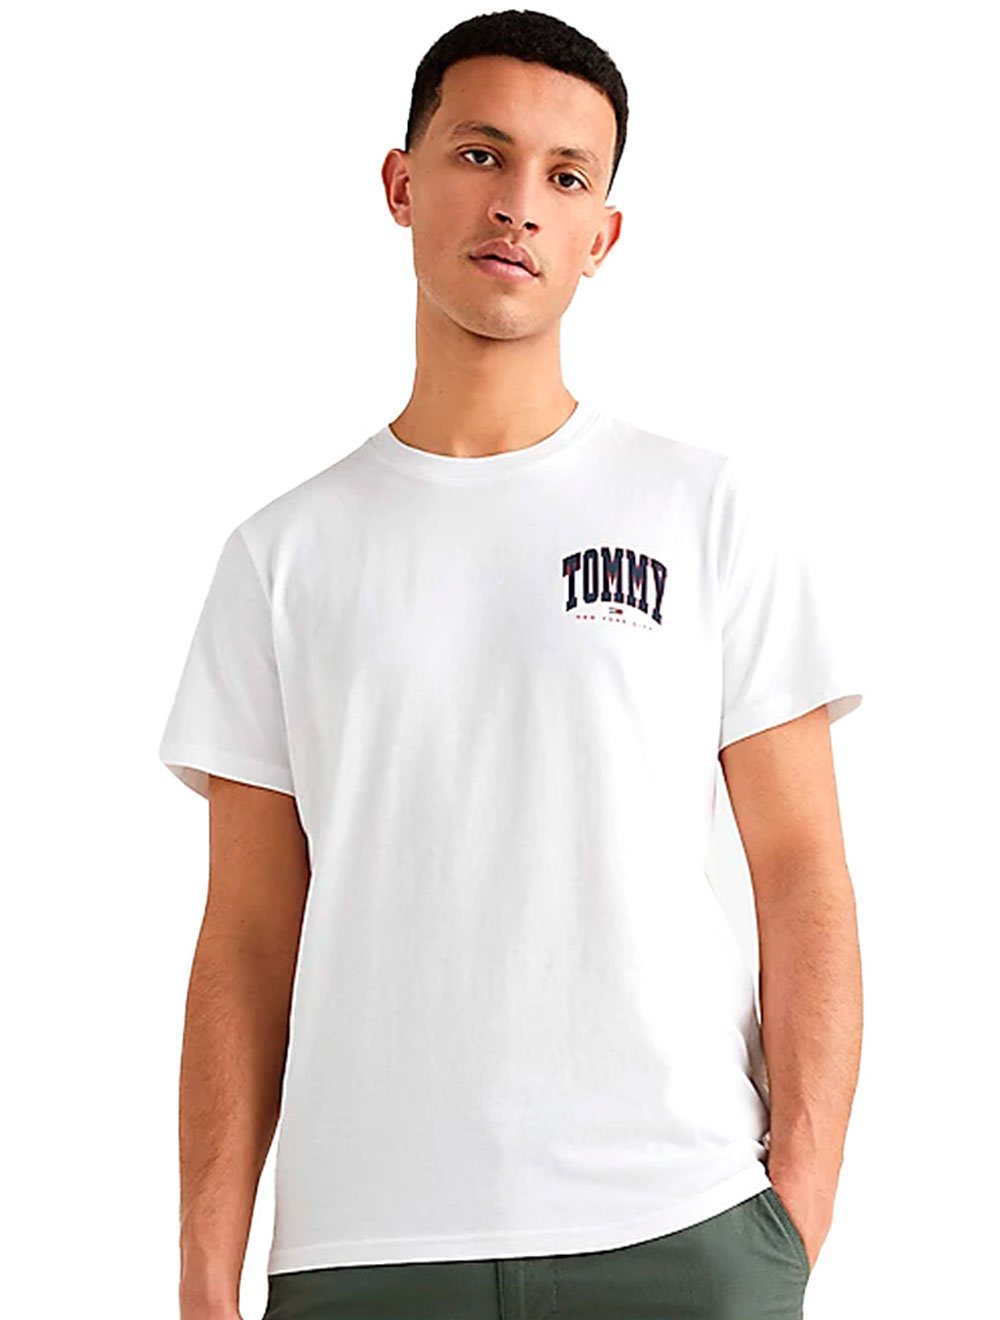 Camiseta Tommy Jeans Masculina Chest College Graphic Branca